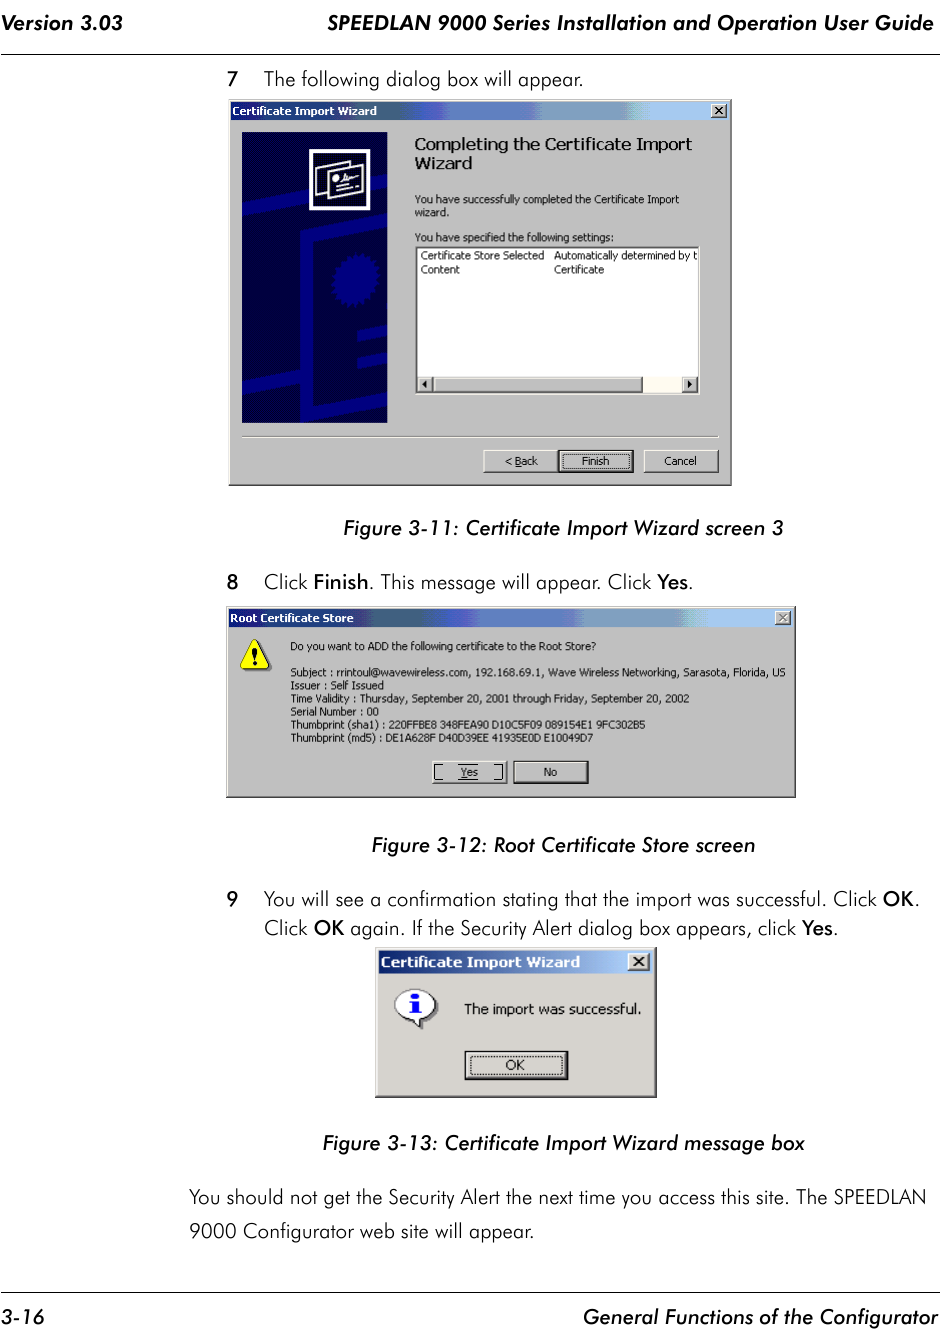 Version 3.03                                 SPEEDLAN 9000 Series Installation and Operation User Guide 3-16 General Functions of the Configurator7The following dialog box will appear.Figure 3-11: Certificate Import Wizard screen 38Click Finish. This message will appear. Click Yes.Figure 3-12: Root Certificate Store screen9You will see a confirmation stating that the import was successful. Click OK. Click OK again. If the Security Alert dialog box appears, click Yes.Figure 3-13: Certificate Import Wizard message boxYou should not get the Security Alert the next time you access this site. The SPEEDLAN 9000 Configurator web site will appear.